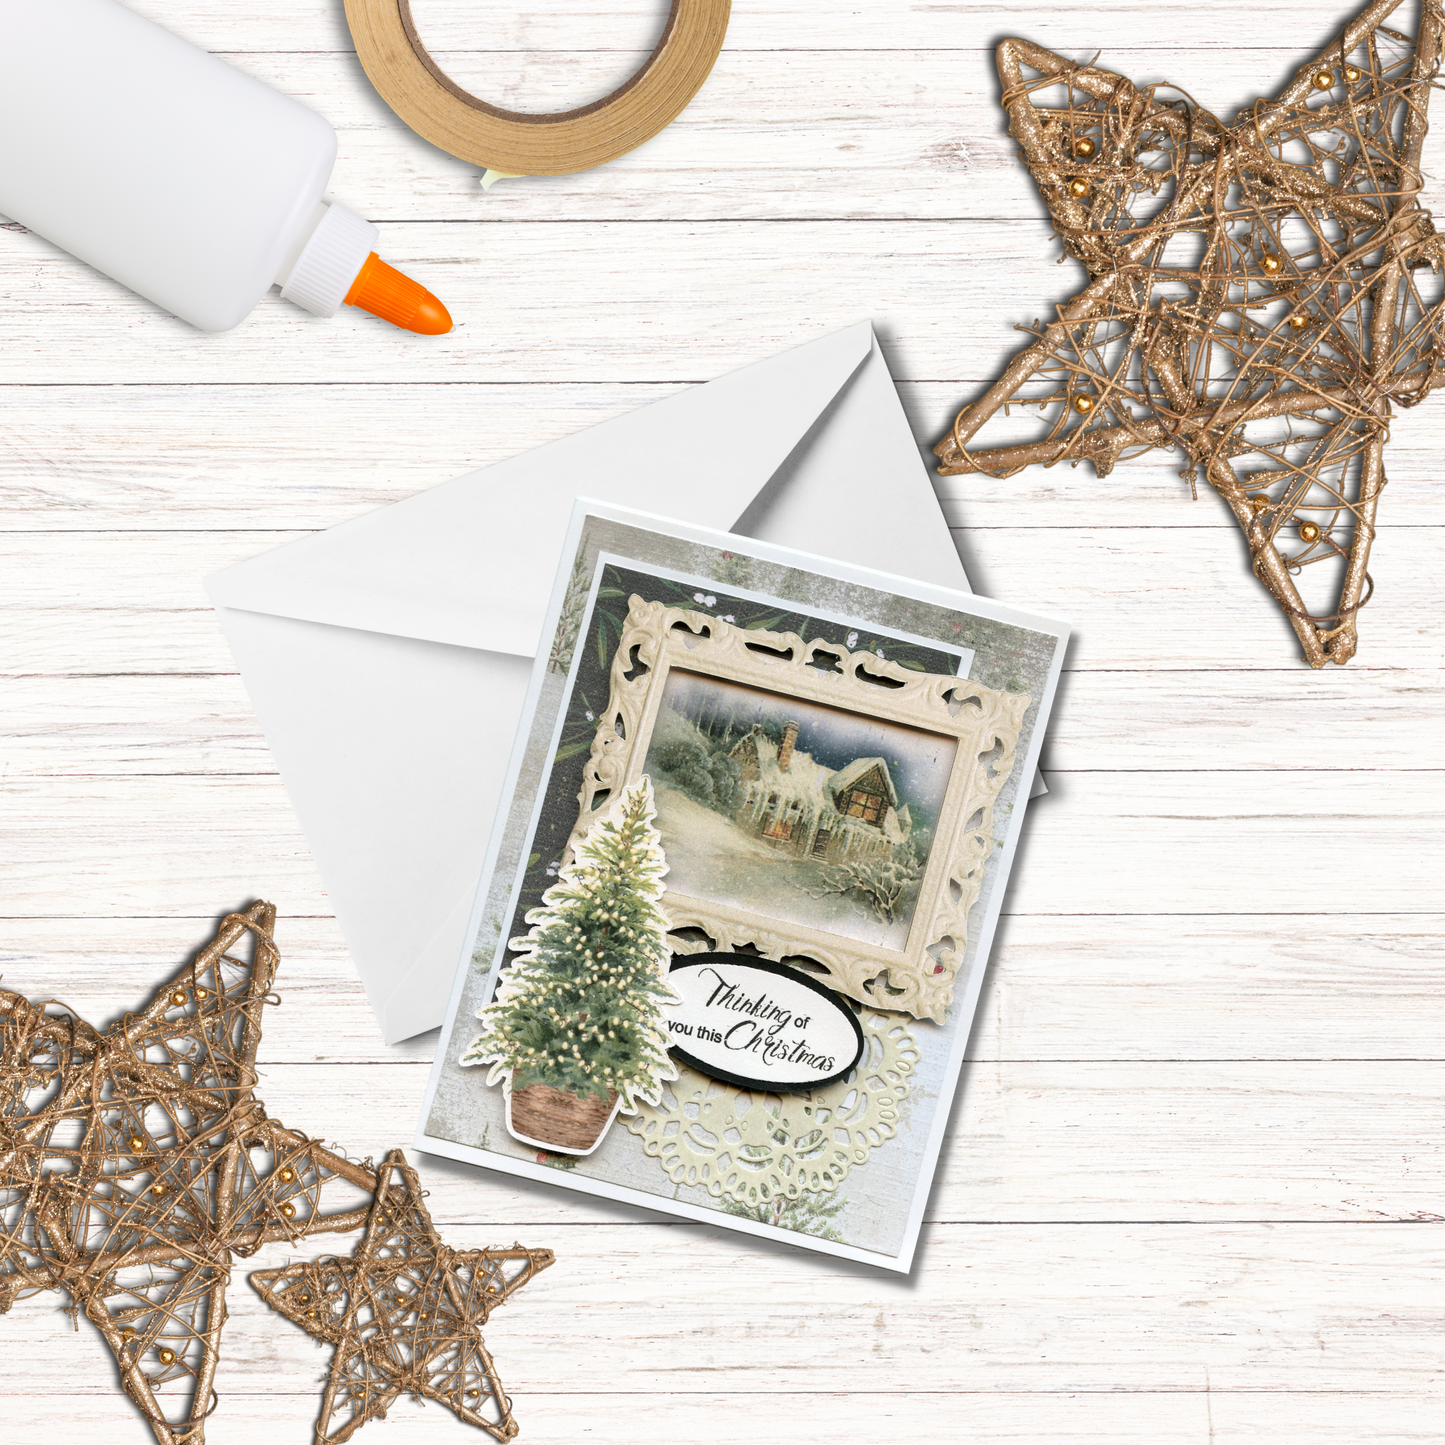 Home for the Holidays Card Kit